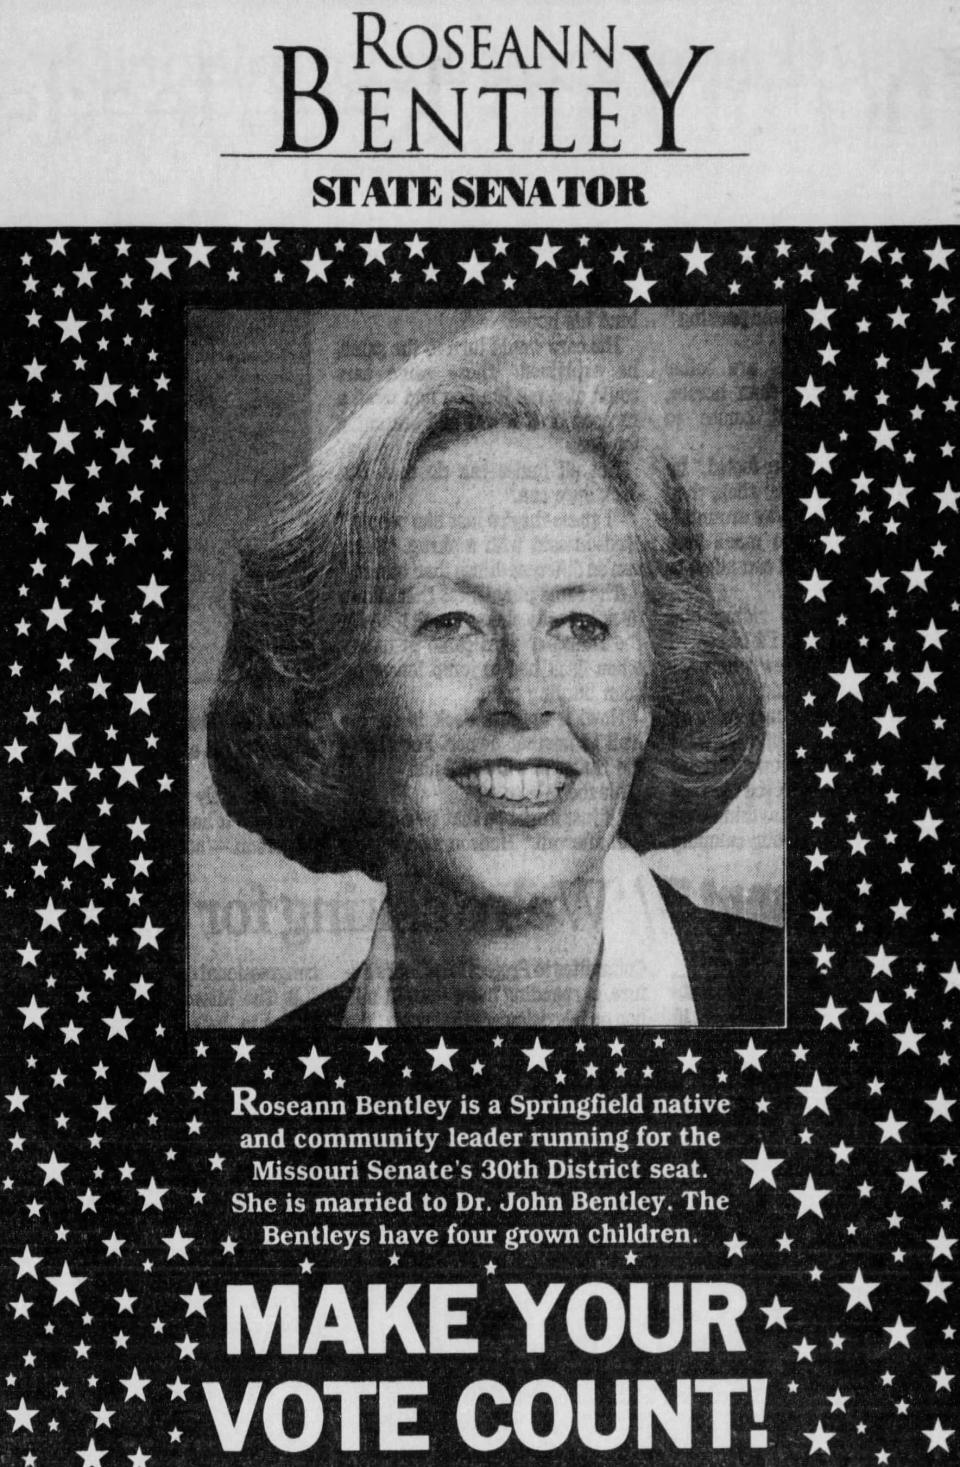 A campaign advertisement for Roseann Bentley when she was running for Missouri State Senator in a Nov. 6, 1994 edition of the Springfield News-Leader.